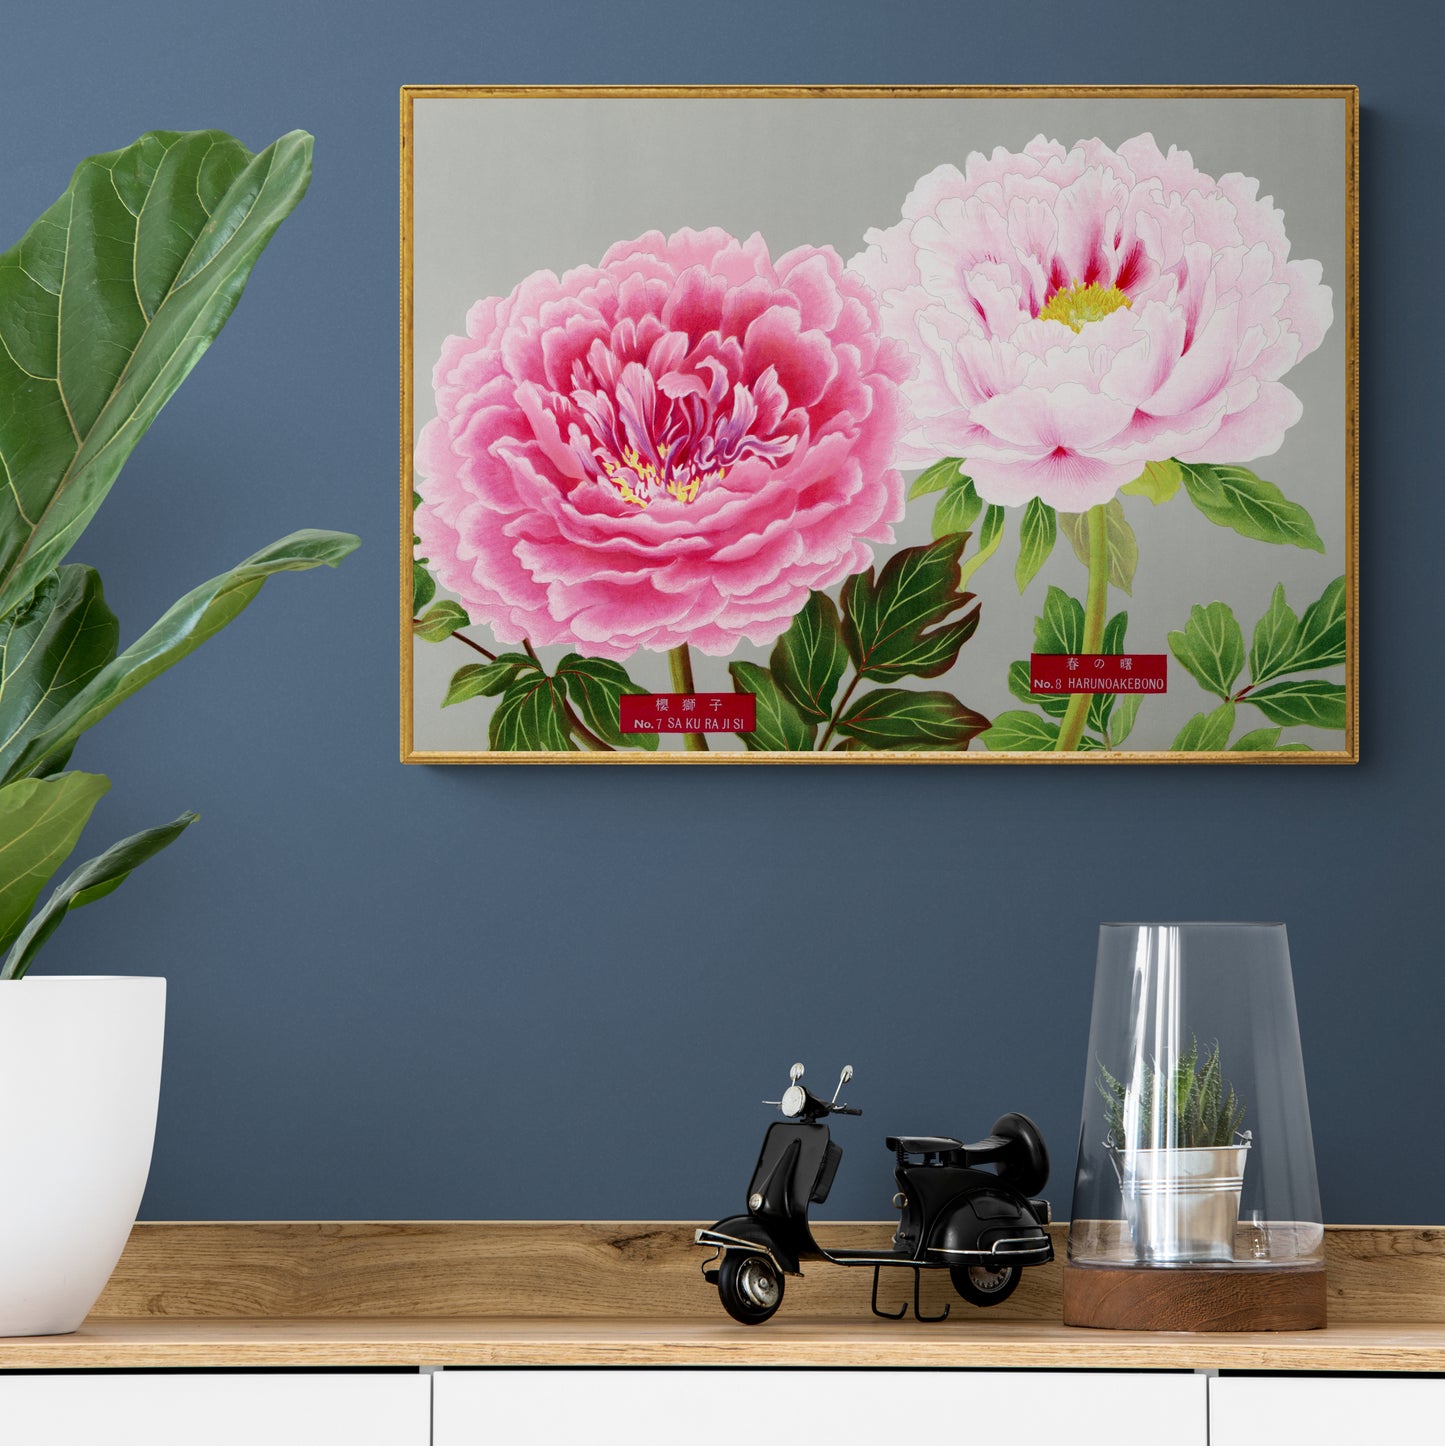 The Picture Book Of Peonies - Pink Peonies